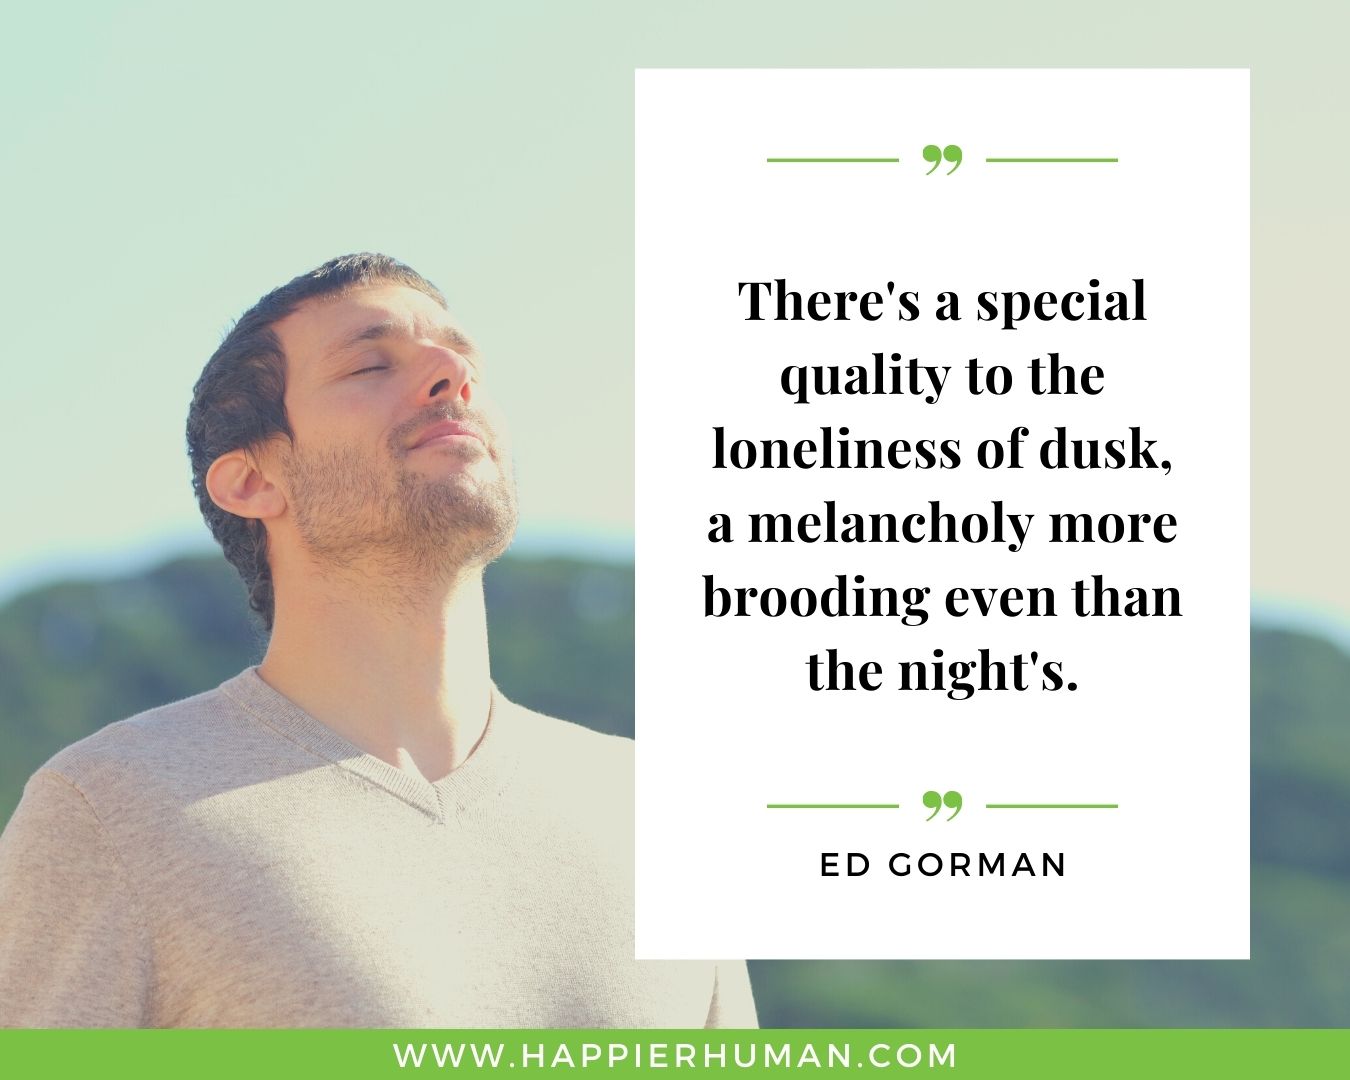 Loneliness Quotes - “There's a special quality to the loneliness of dusk, a melancholy more brooding even than the night's.”– Ed Gorman